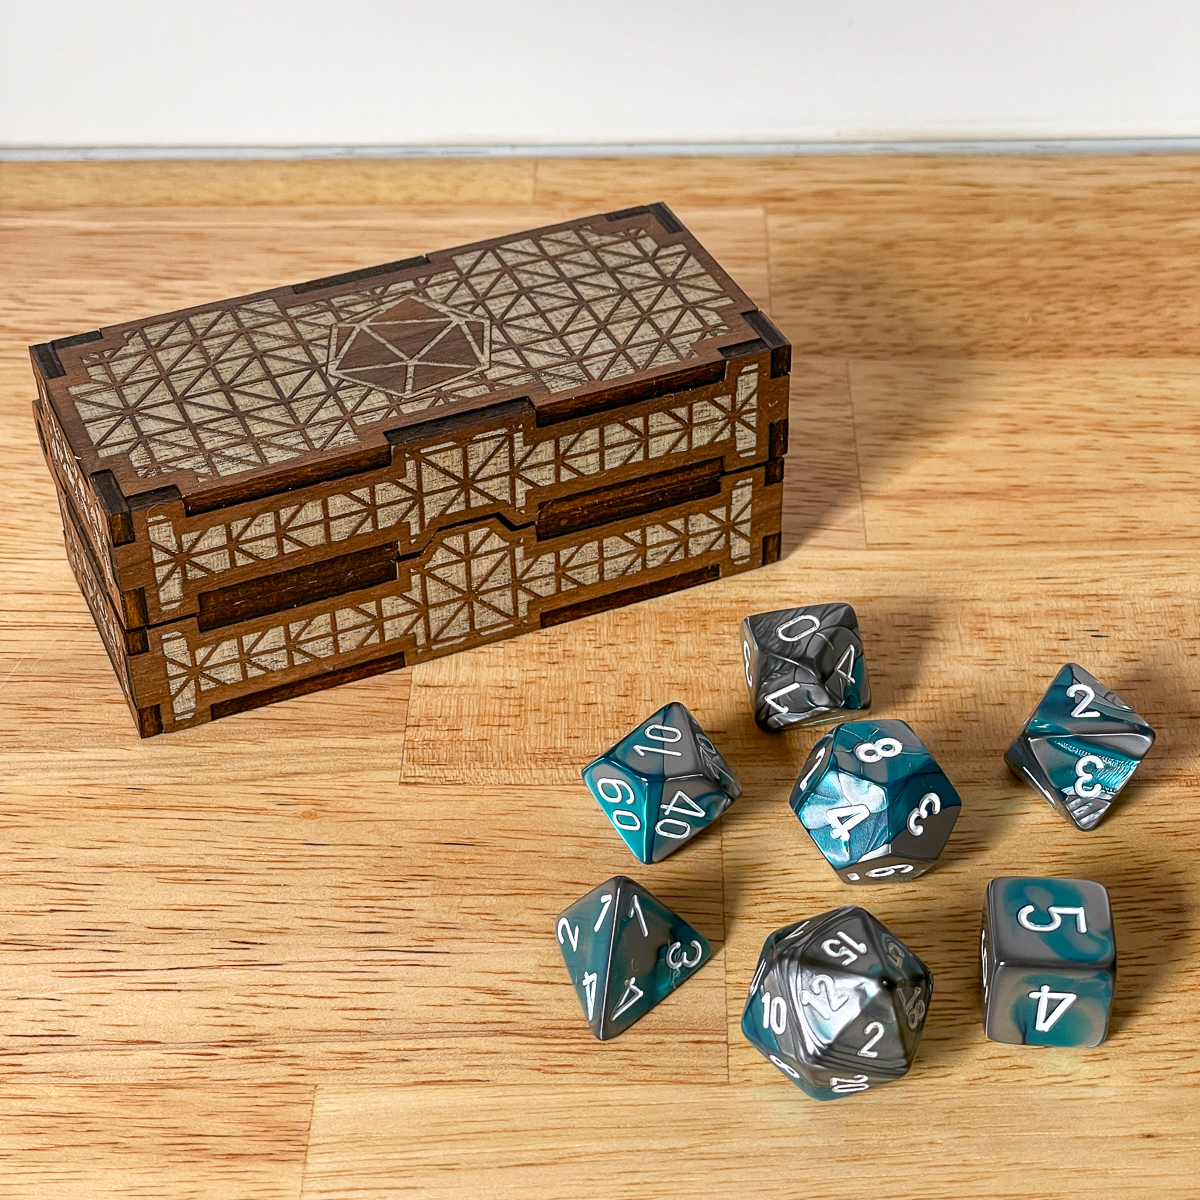 closed DIY dice box with dice on the table beside it